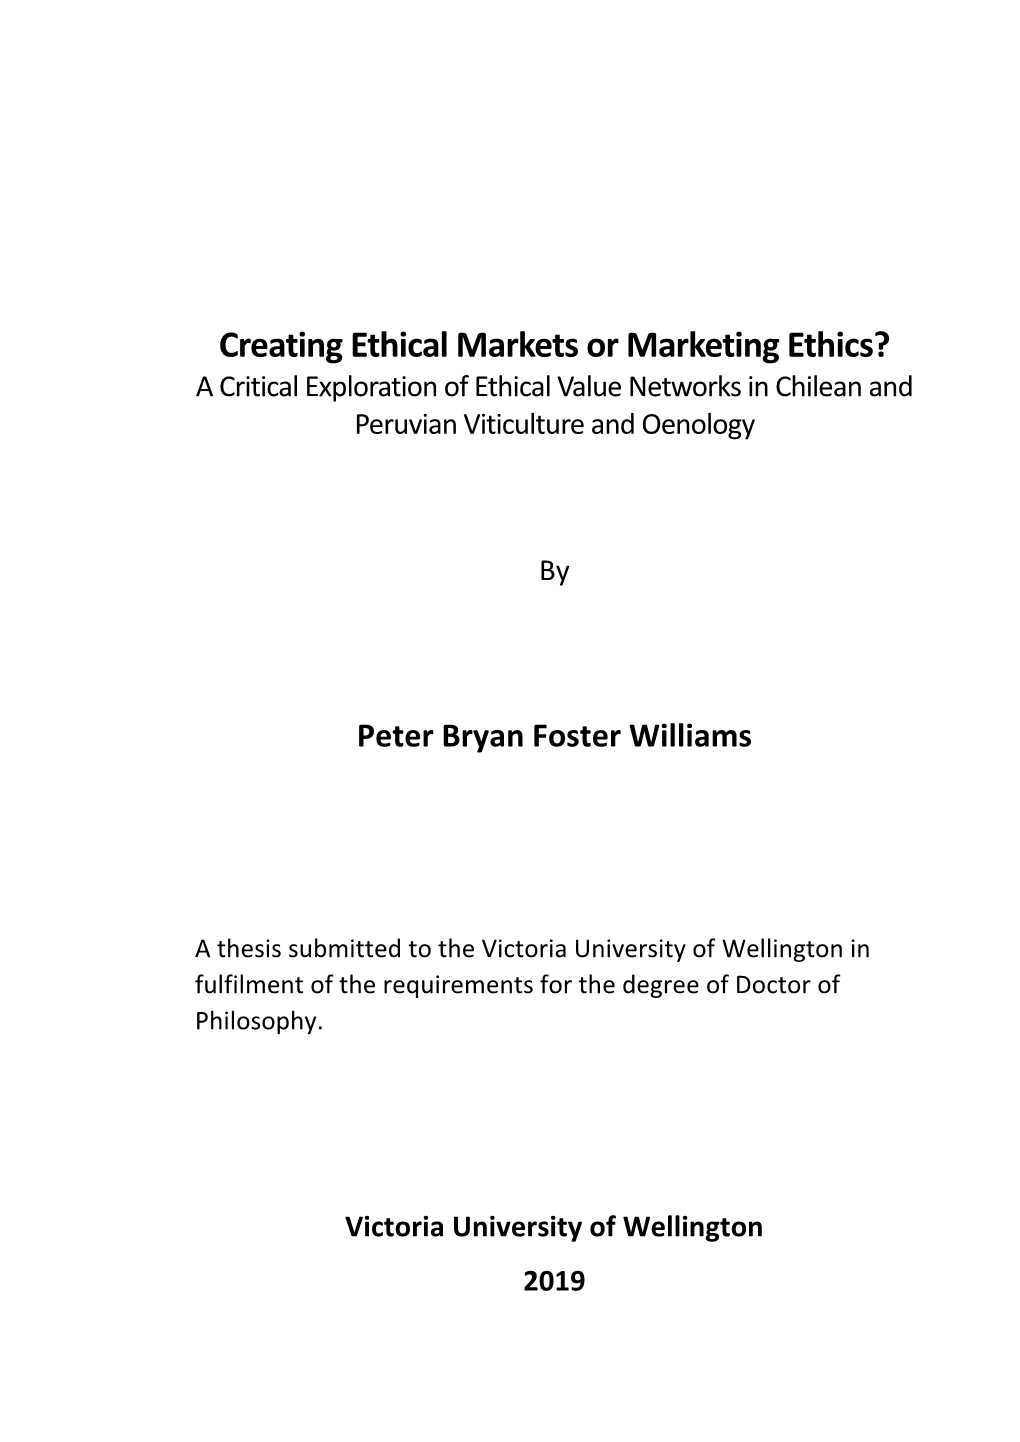 Creating Ethical Markets Or Marketing Ethics? a Critical Exploration of Ethical Value Networks in Chilean and Peruvian Viticulture and Oenology